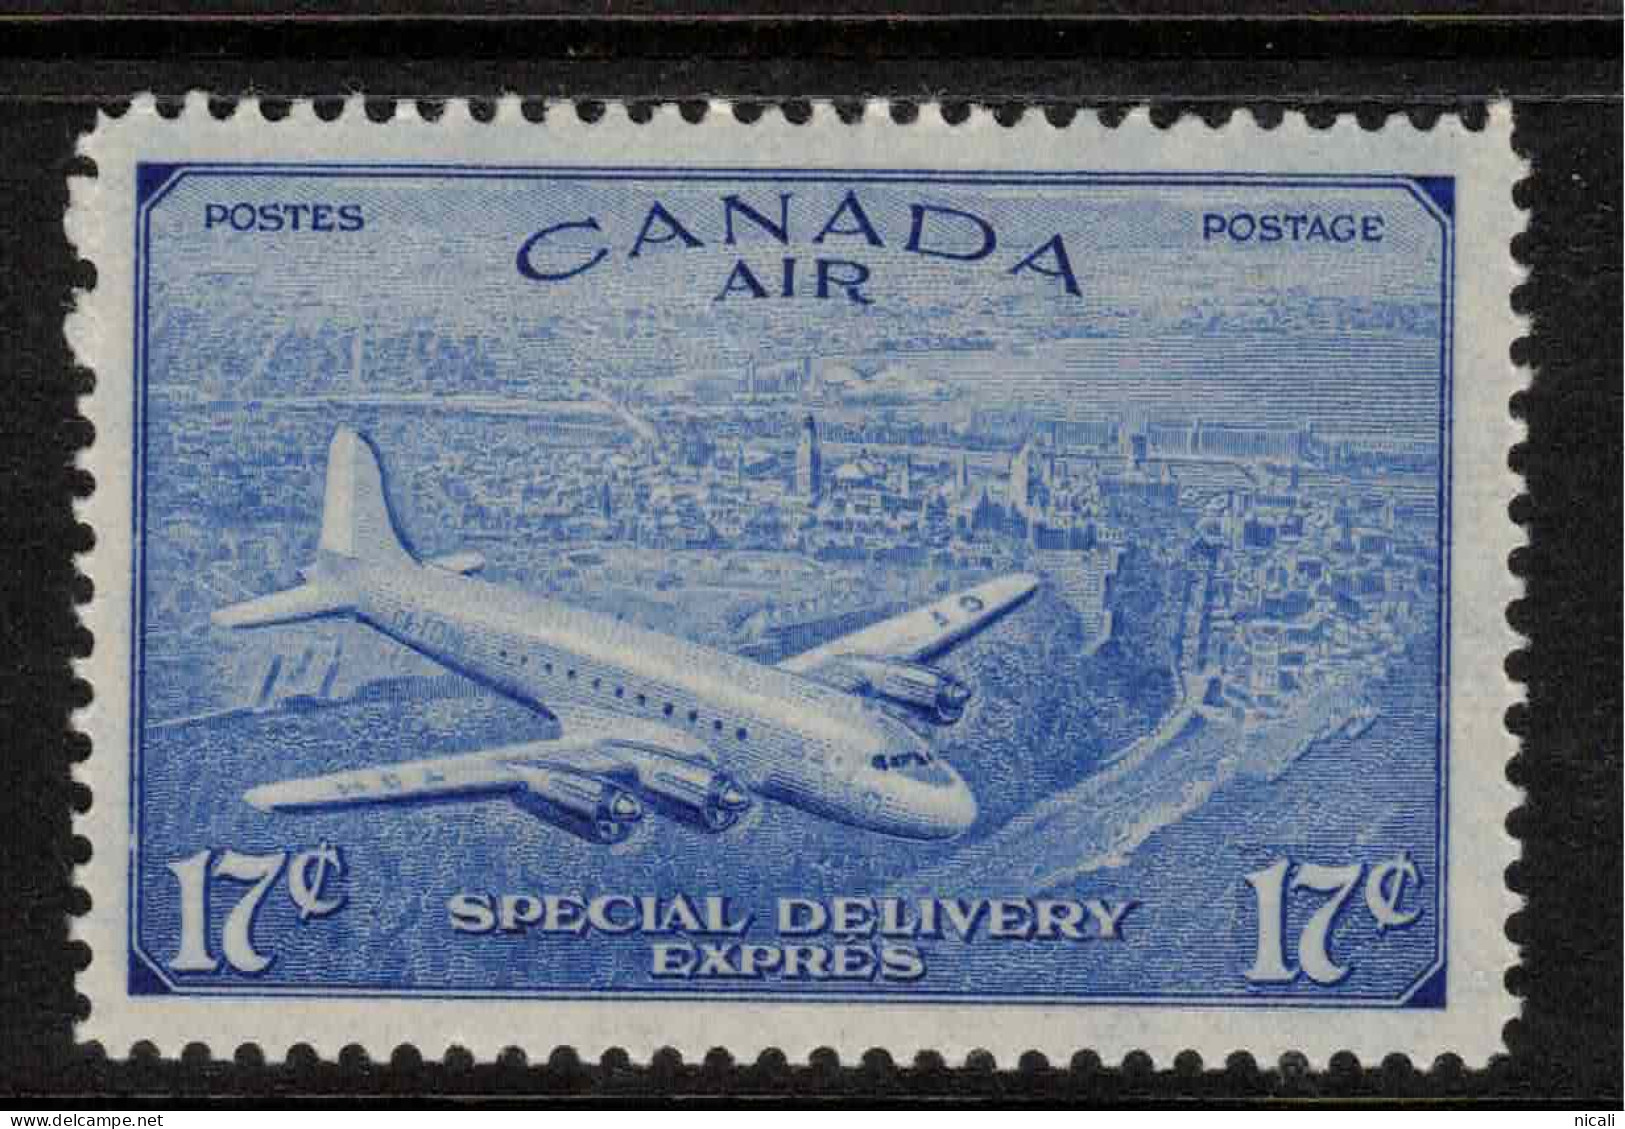 CANADA 1946 17c Special Delivery SG S17 HM ZZ83 - Luchtpost: Expres